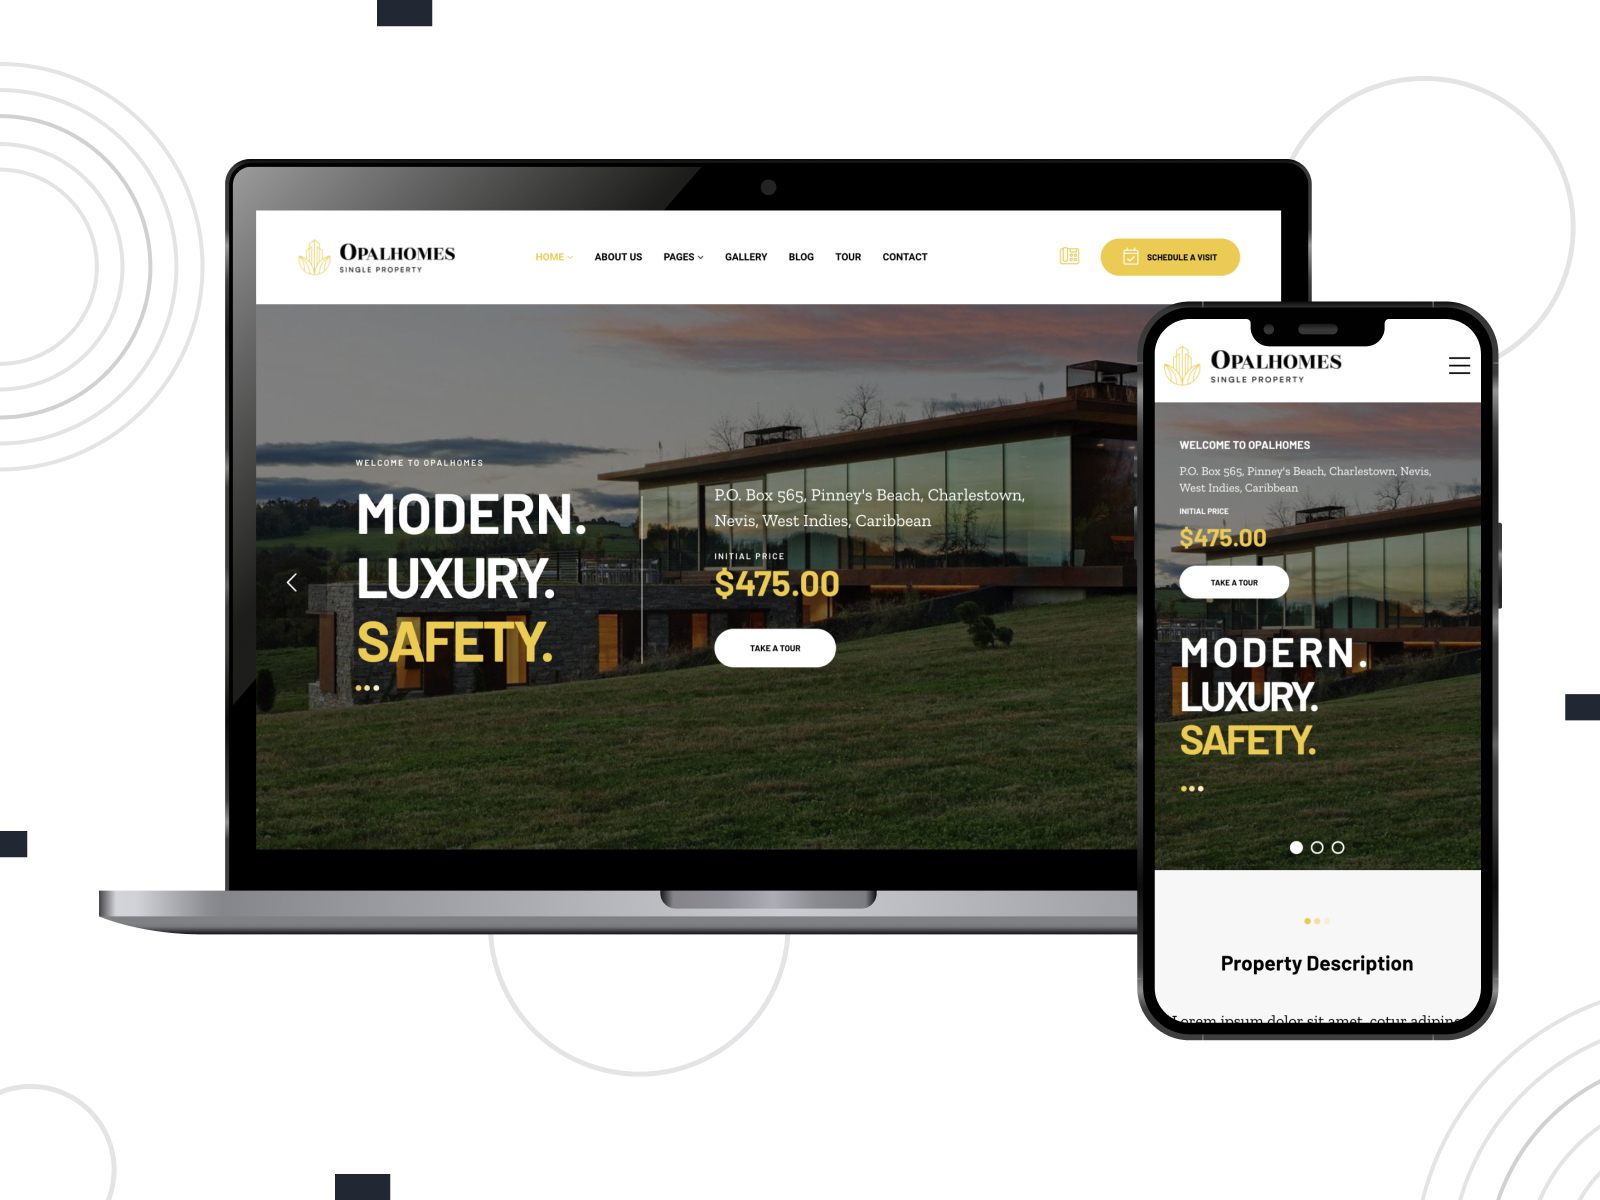 Visual of Opalhomes, a mobile-friendly & robust Elementor theme for real estate business with content-rich gallery & blog pages in goldenrod, white, and black pigment scheme.